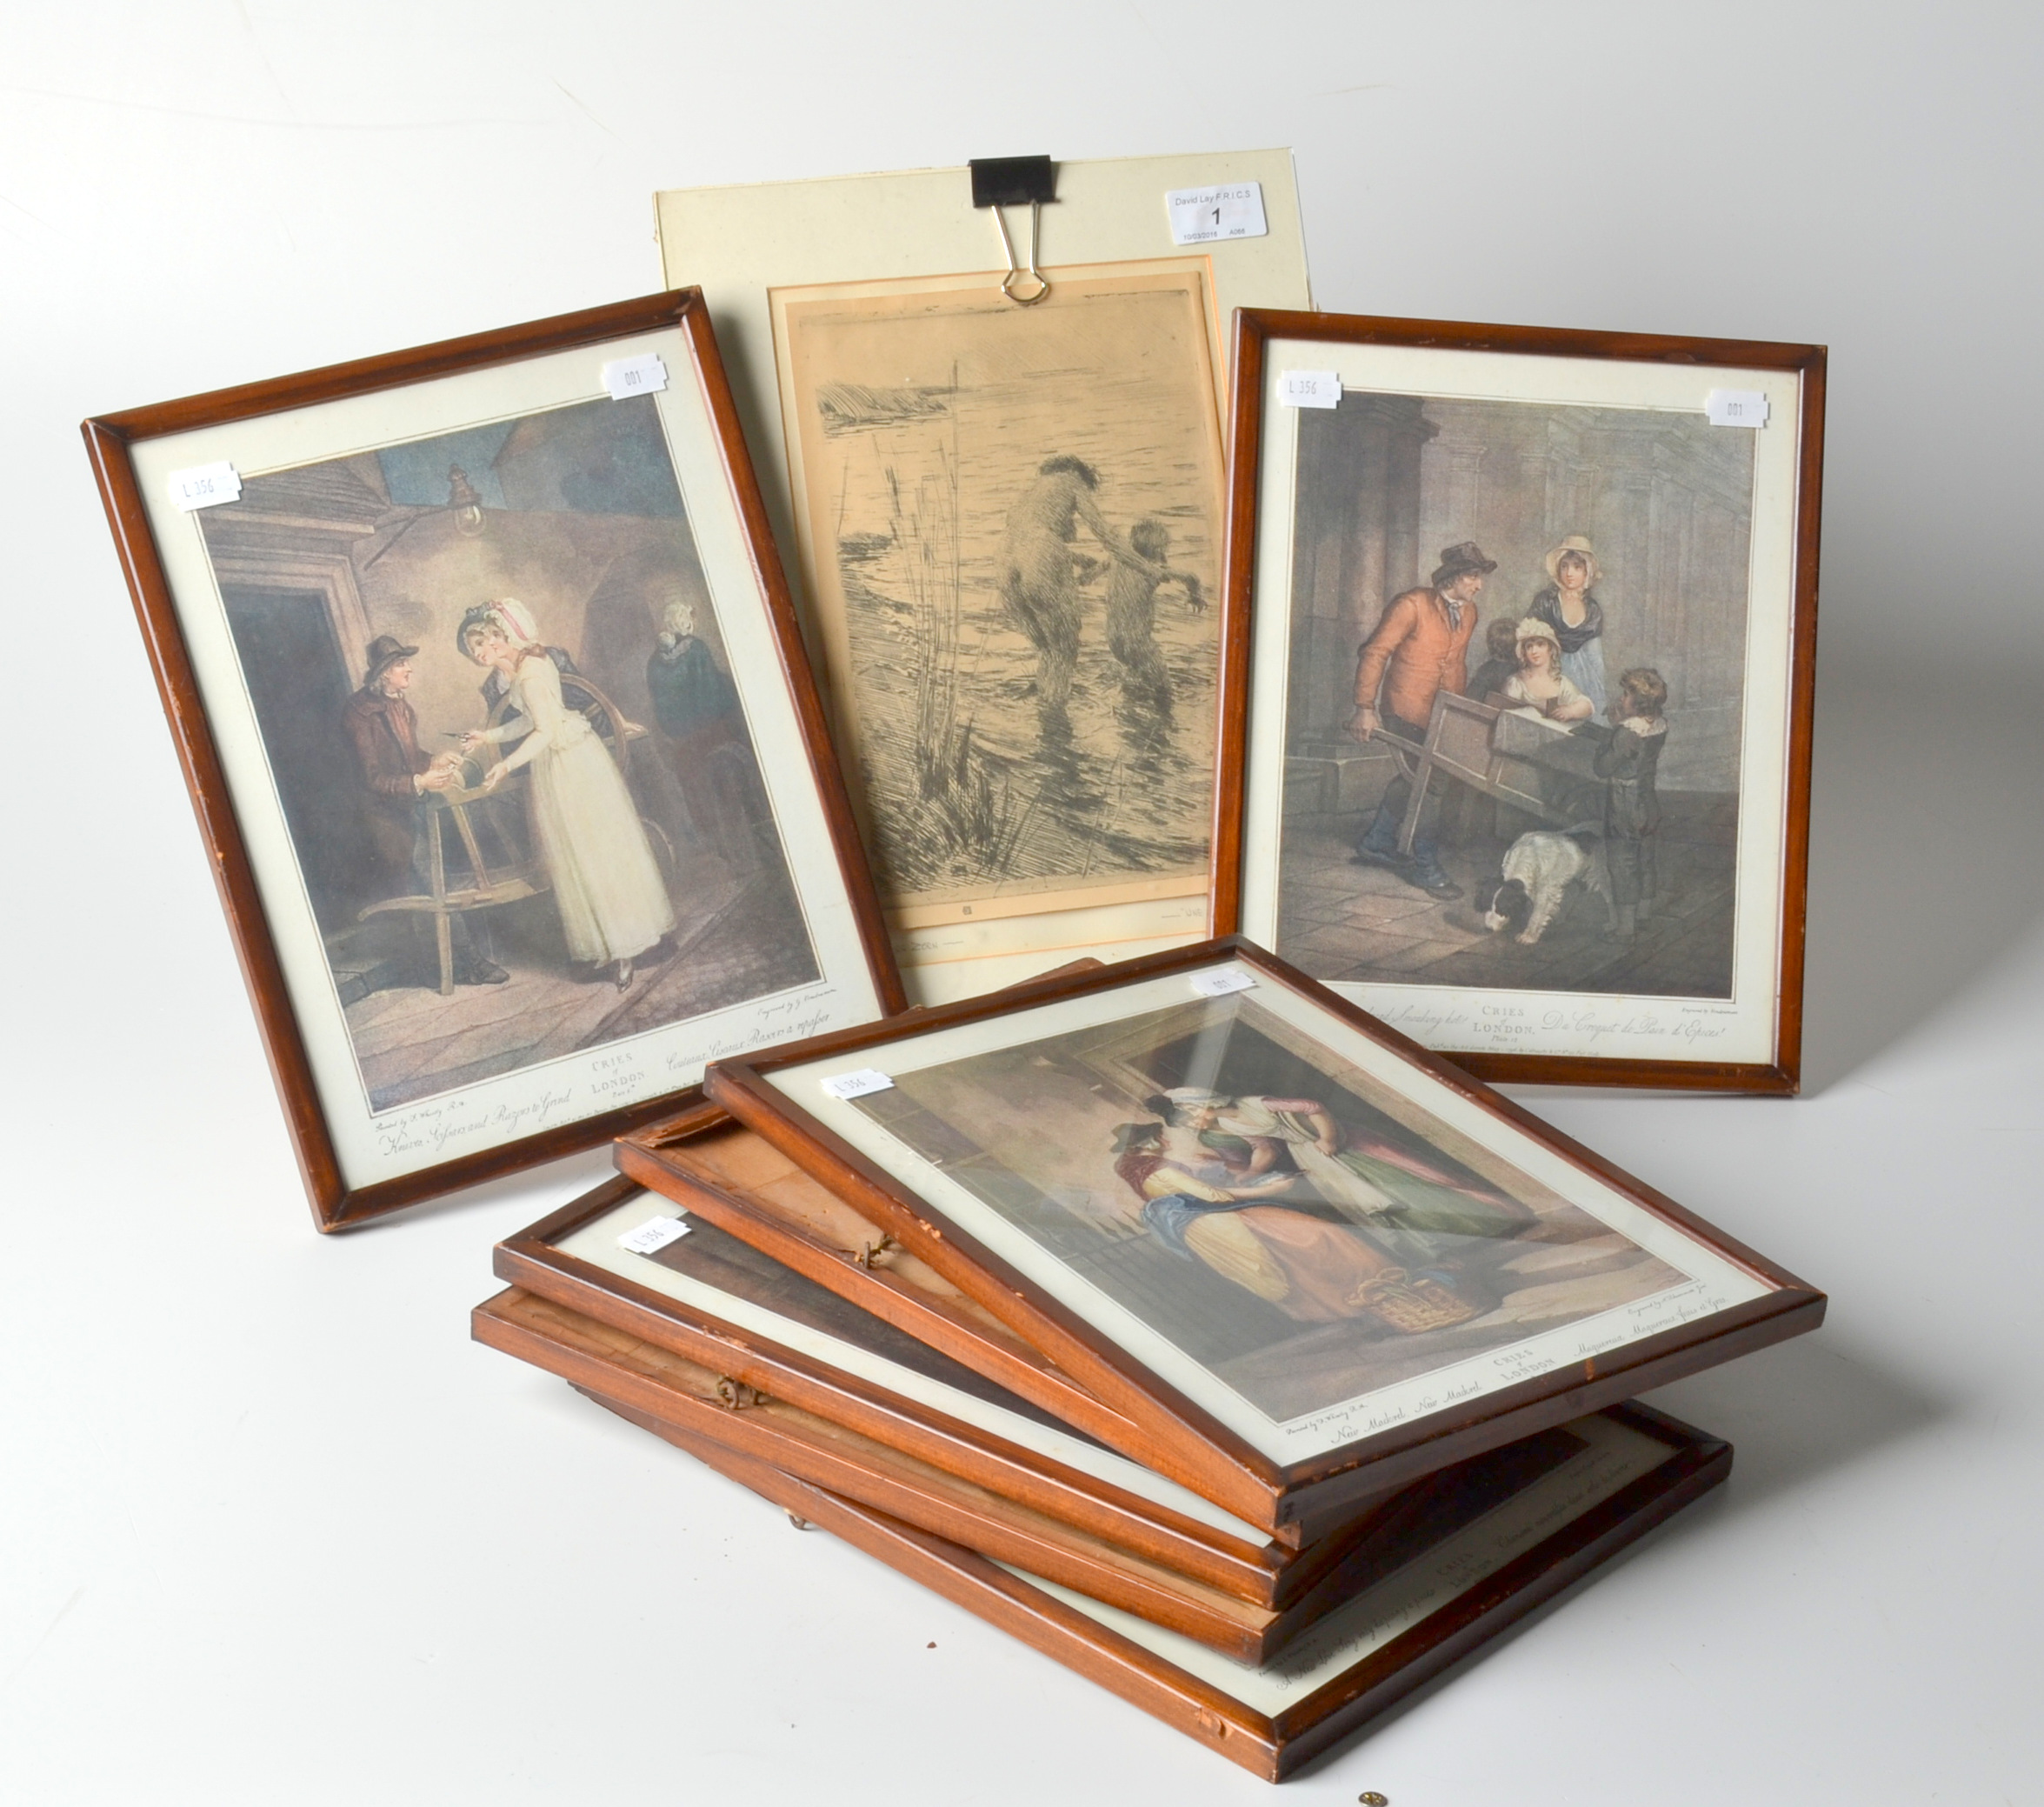 An Anders Zorn print "Une Premiere" and other prints.